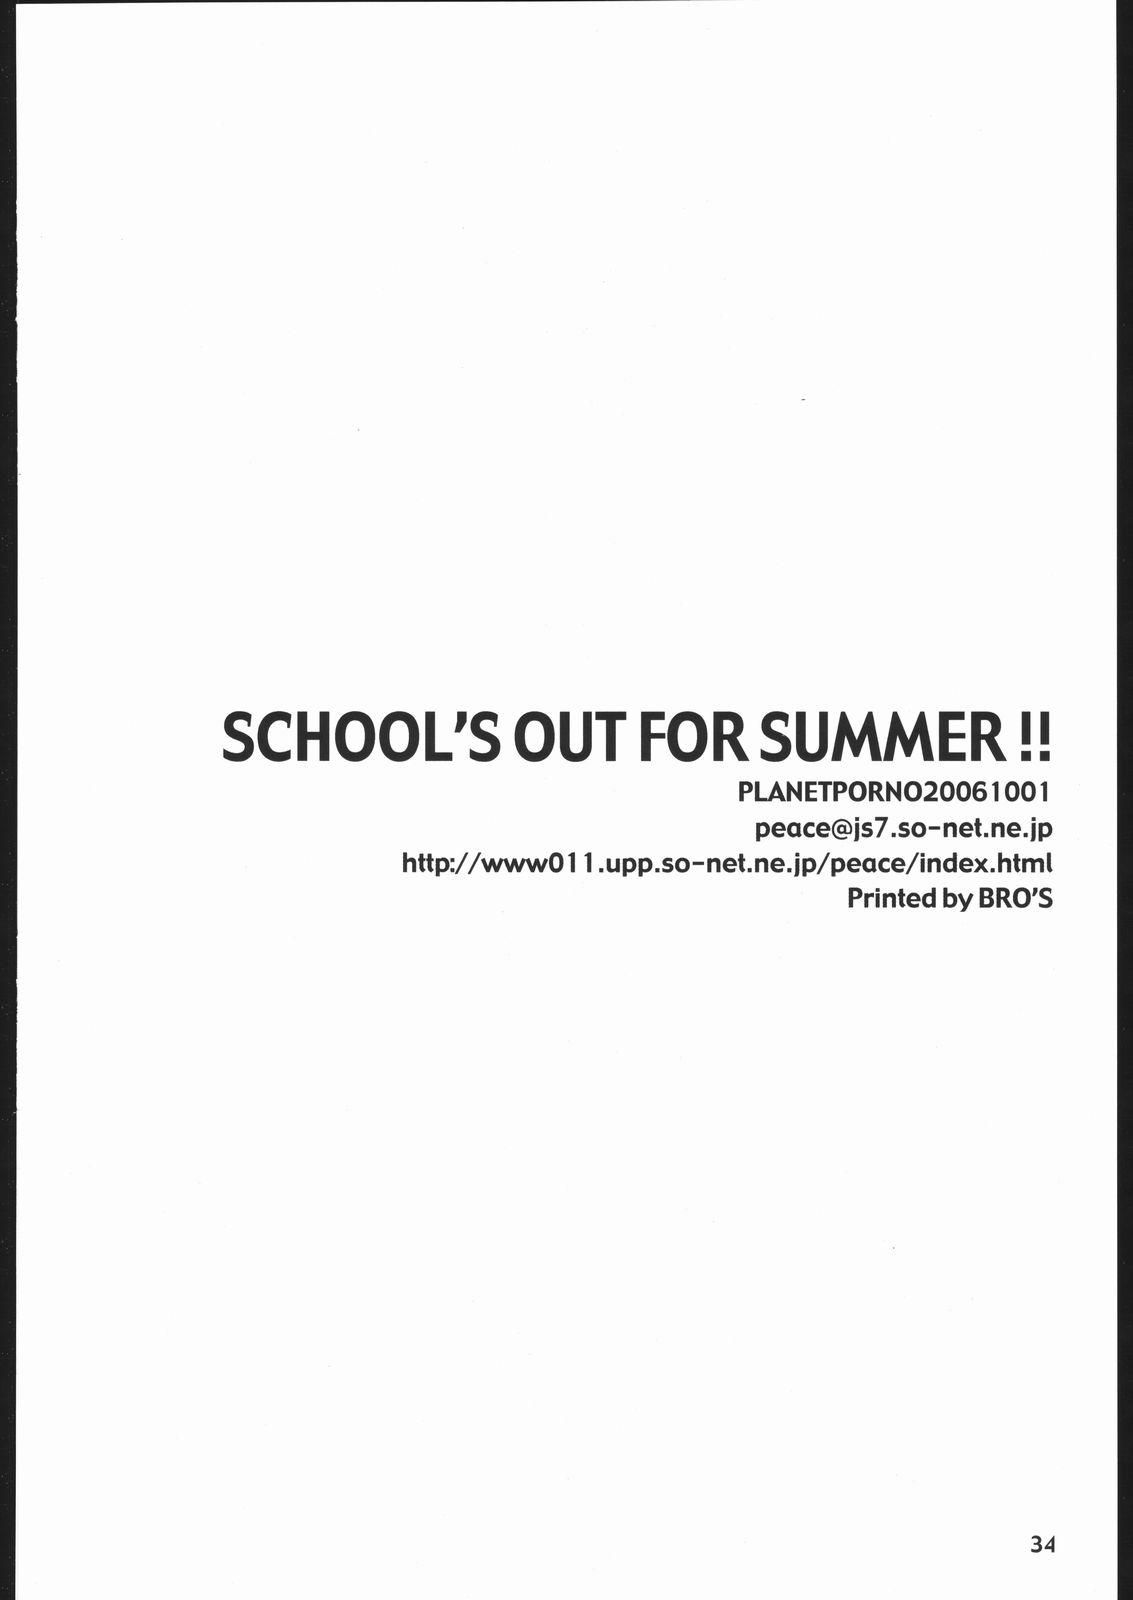 SCHOOL'S OUT FOR SUMMER! 32